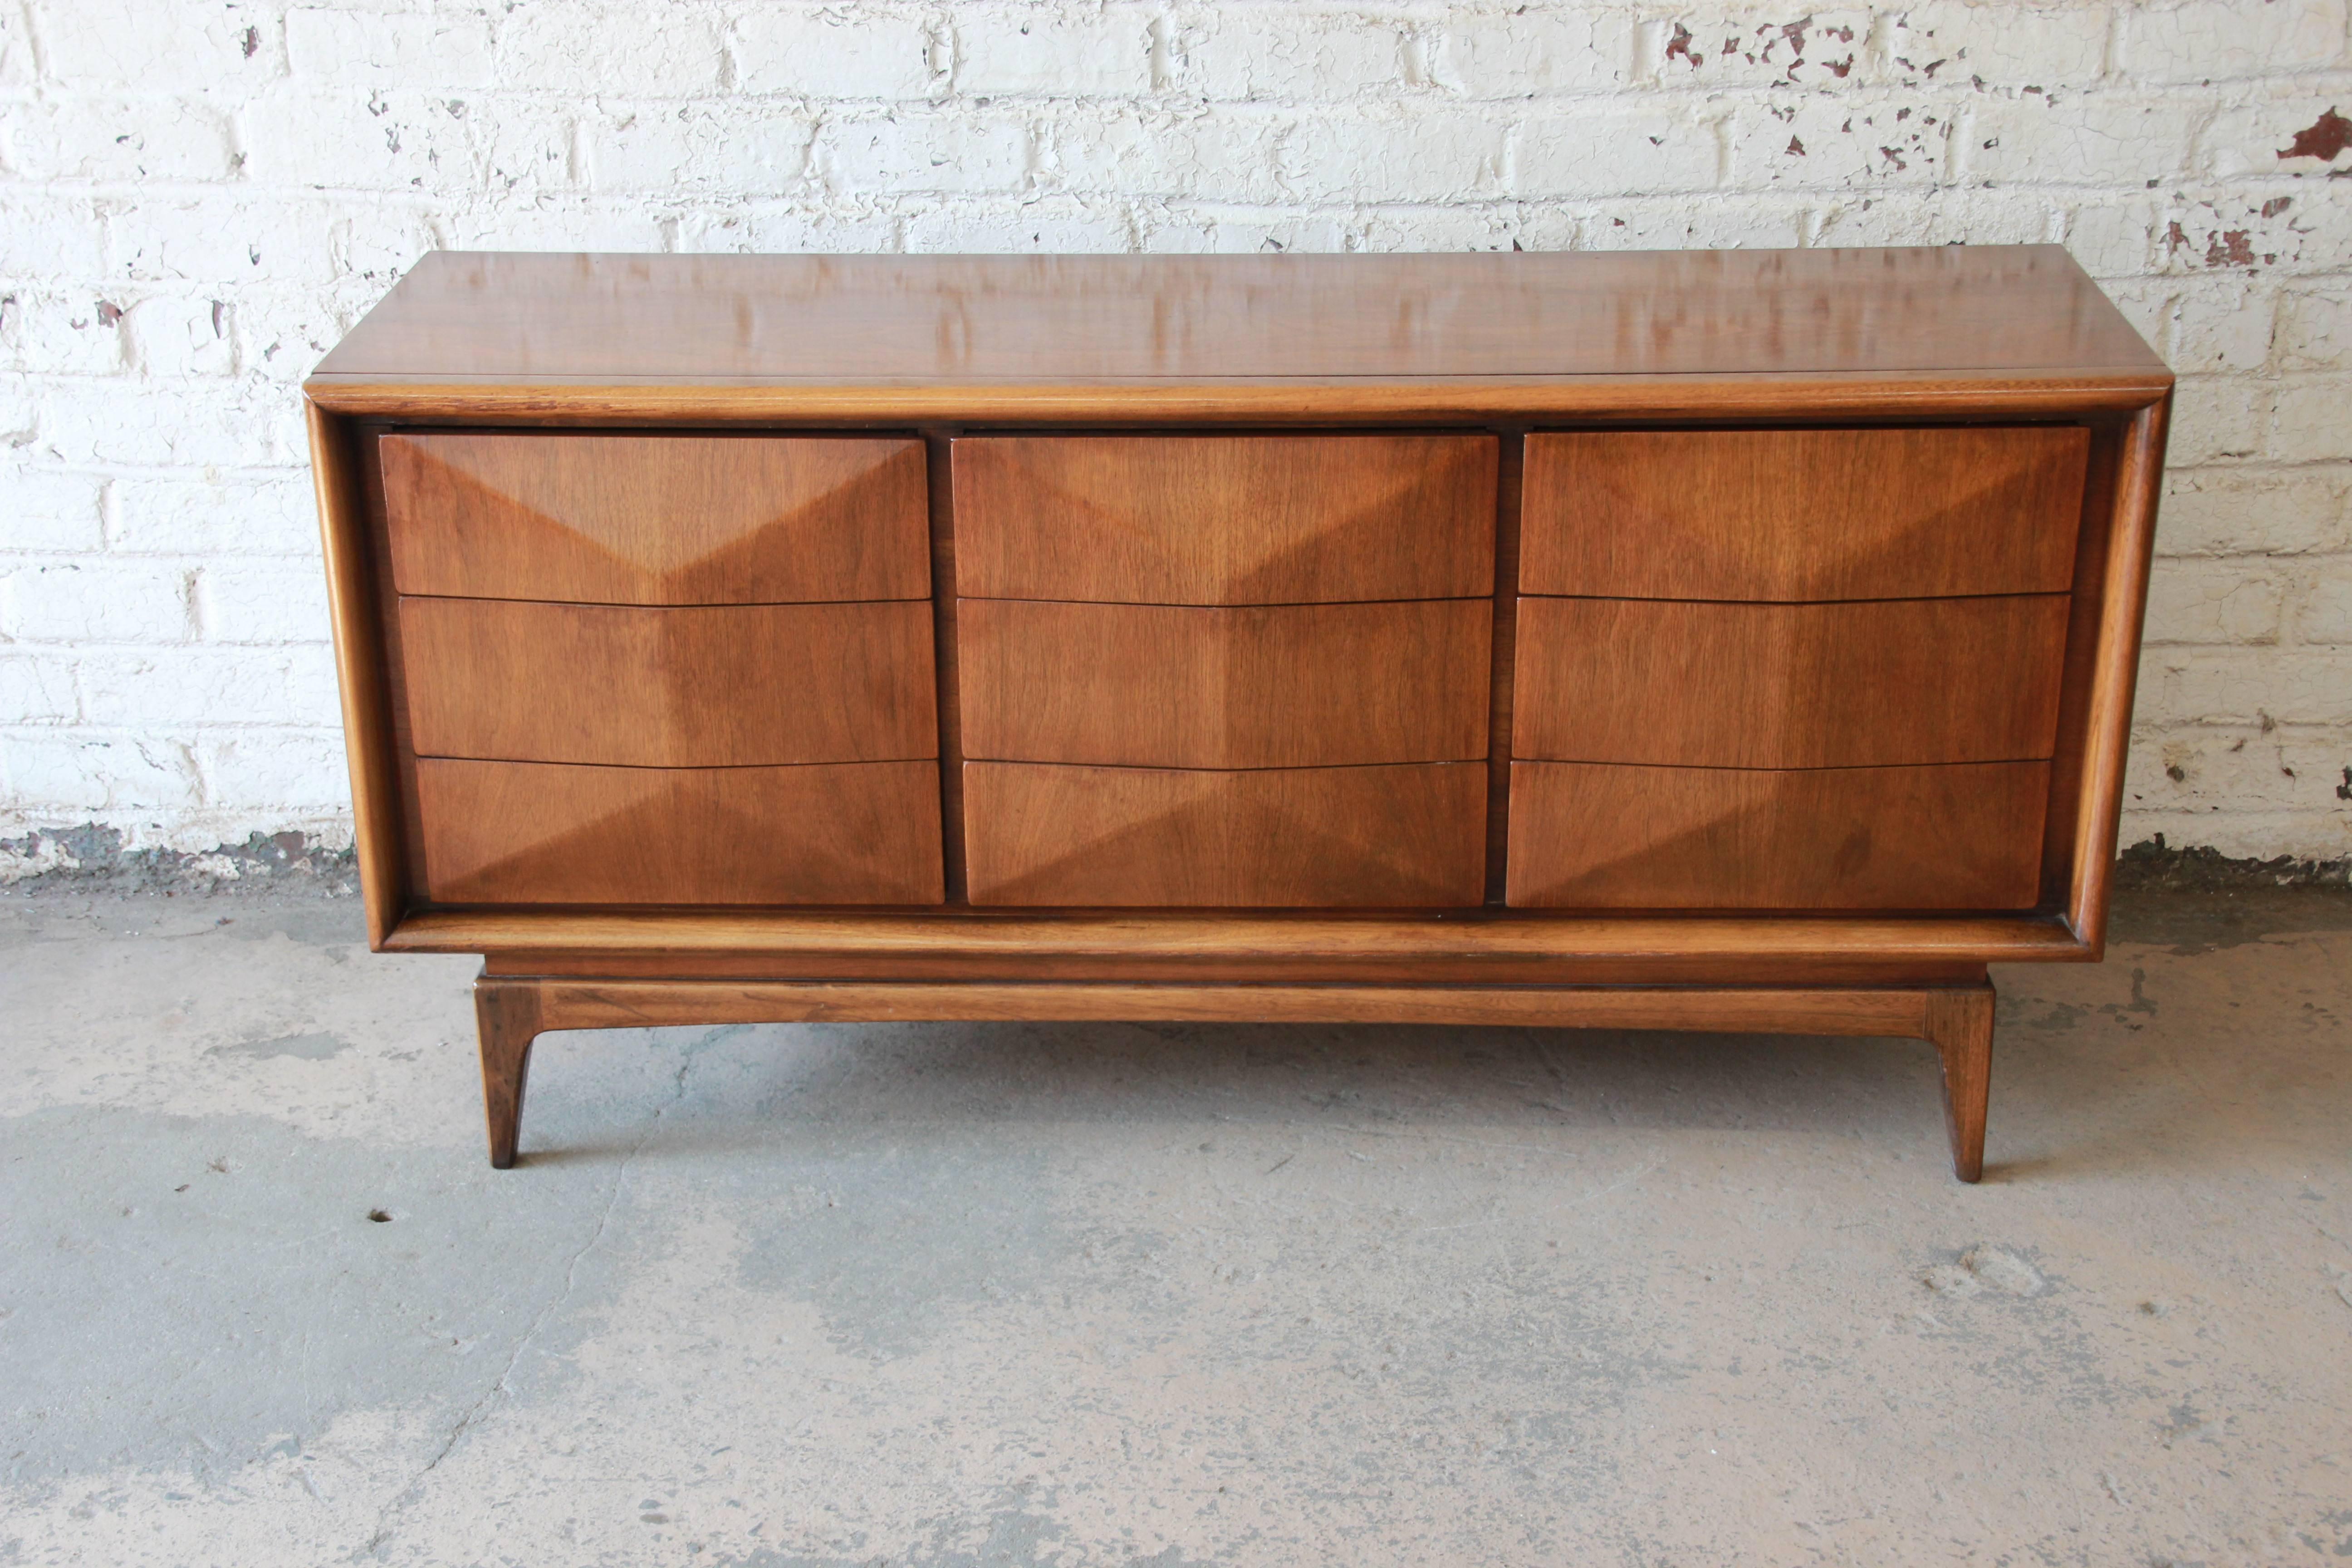 Offering a very nice Mid-Century Modern diamond front nine-drawer dresser by United Furniture Co. Each of the drawers open and close smooth displaying a beautiful walnut wood grain. The dresser is in great vintage condition with very minor surface